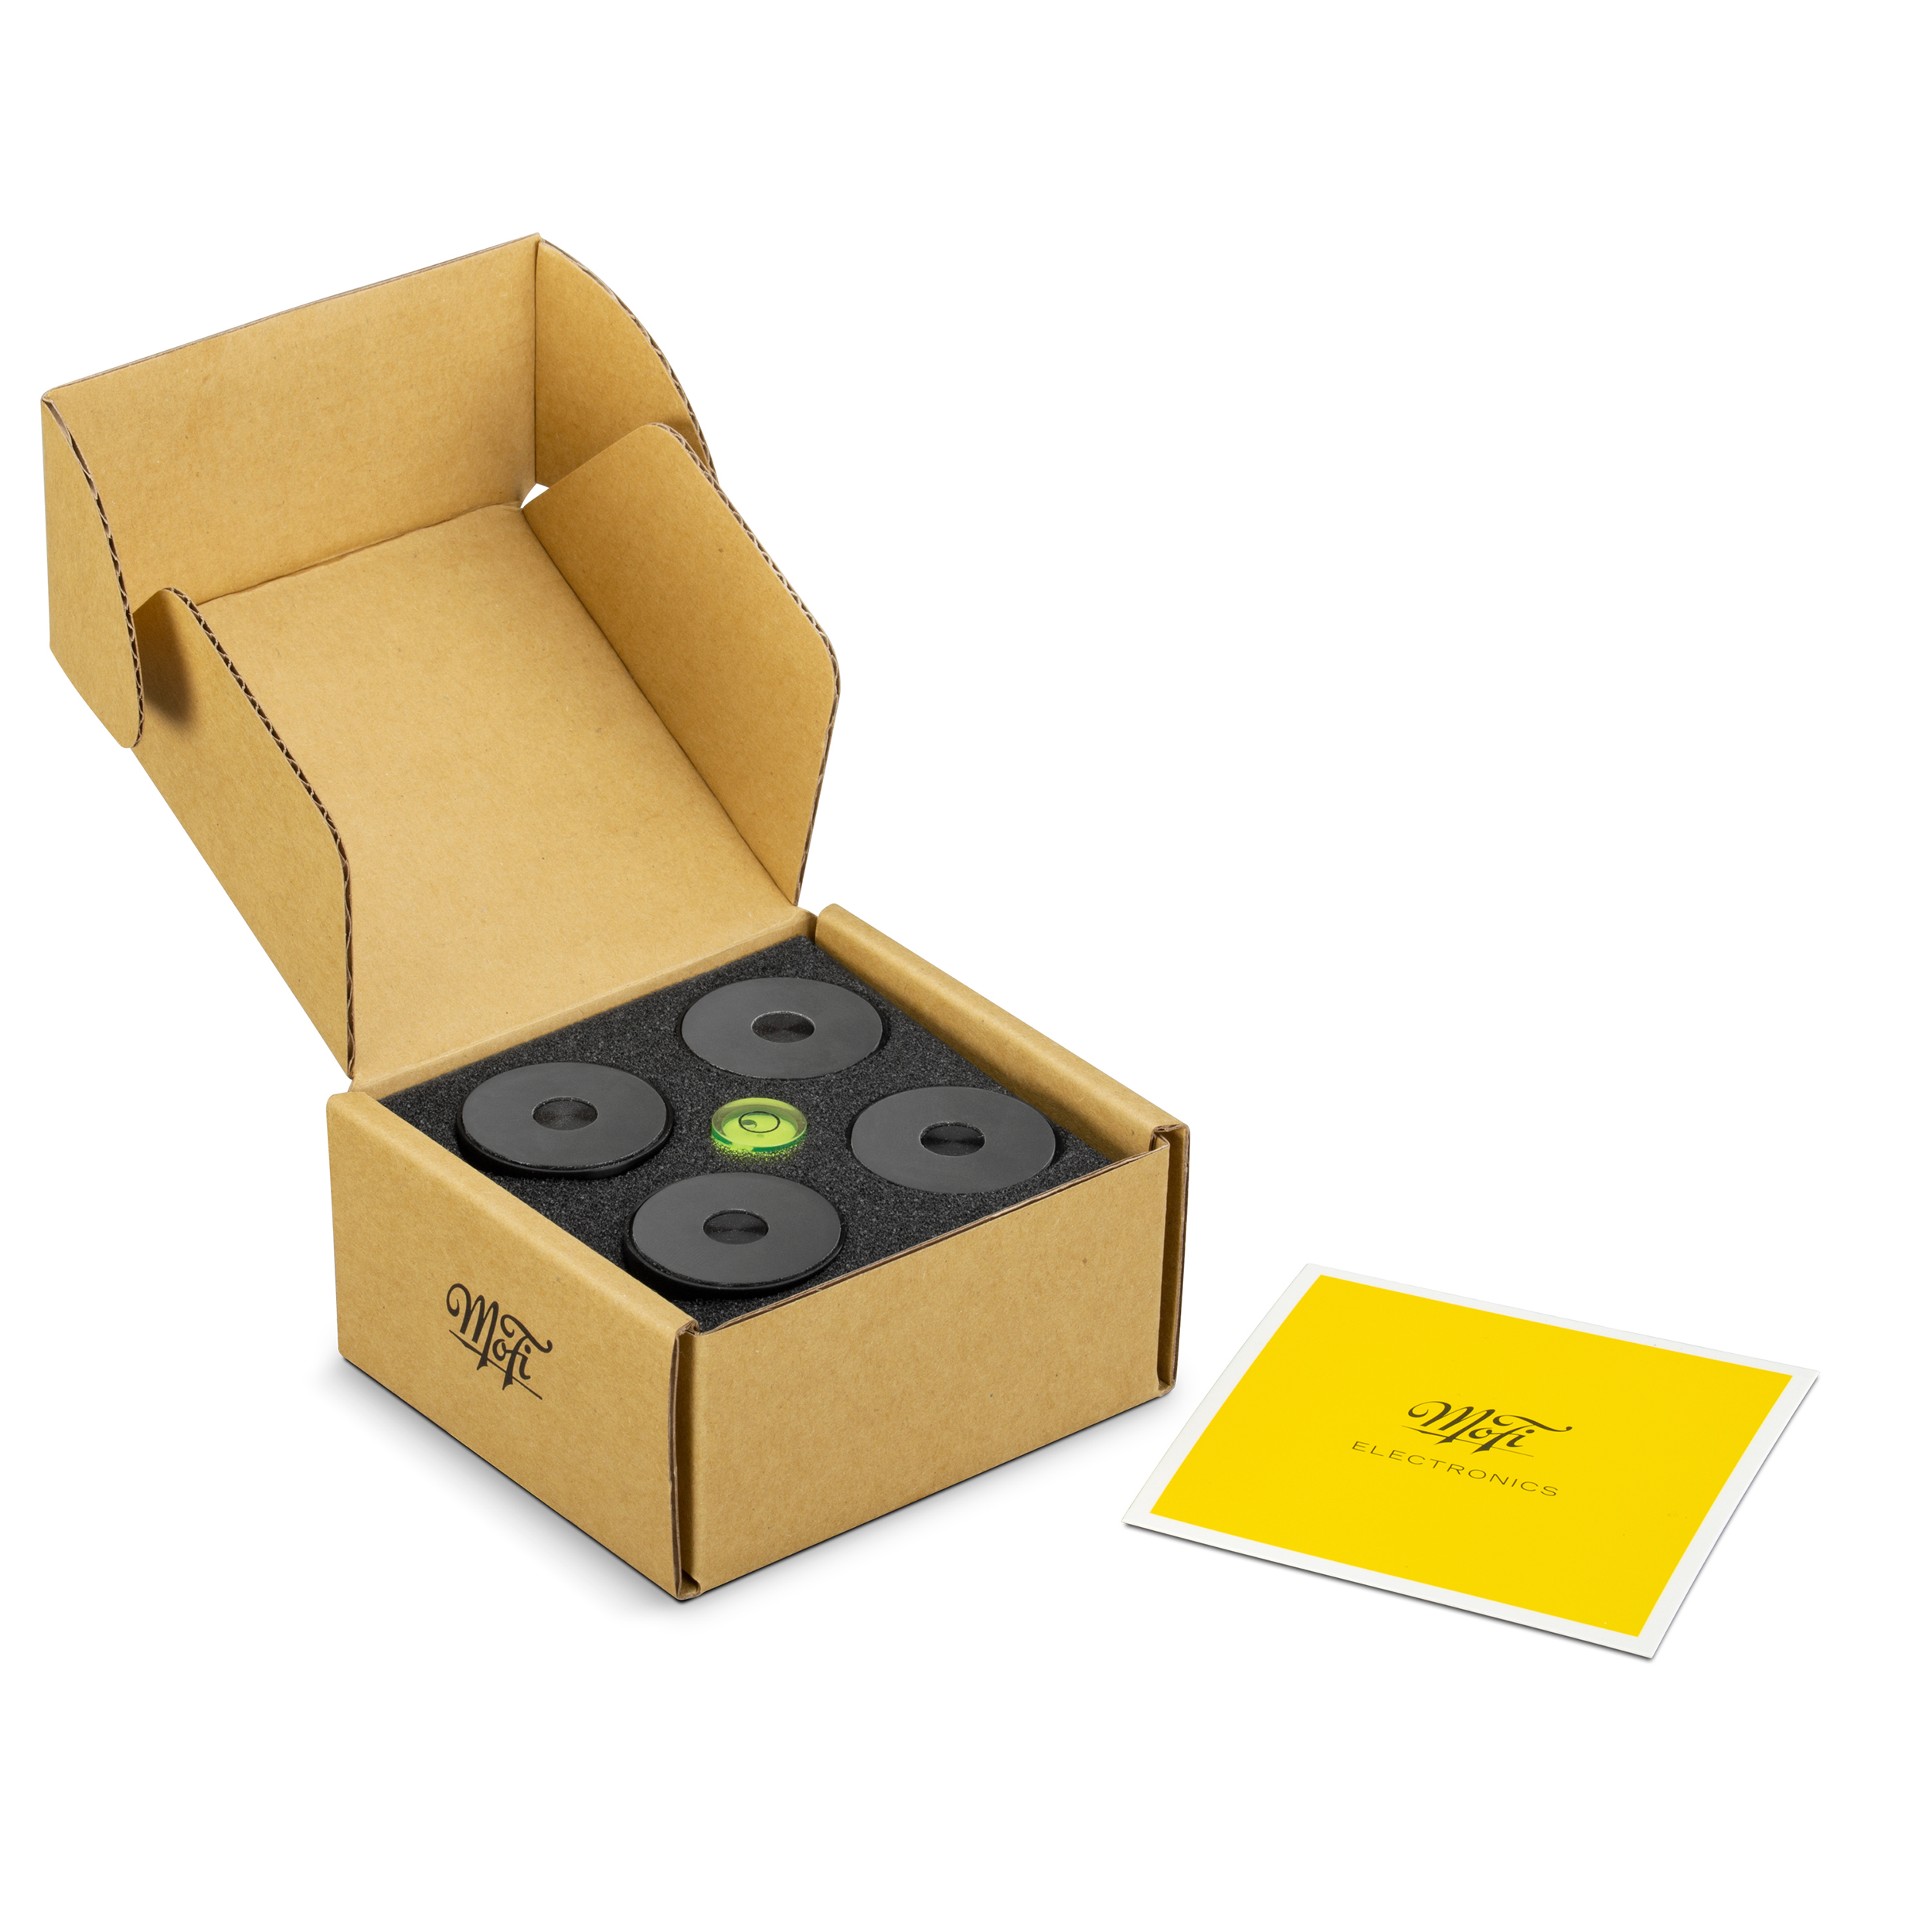 Image of box of 4 stabilizer feet with included bubble level and product manual.